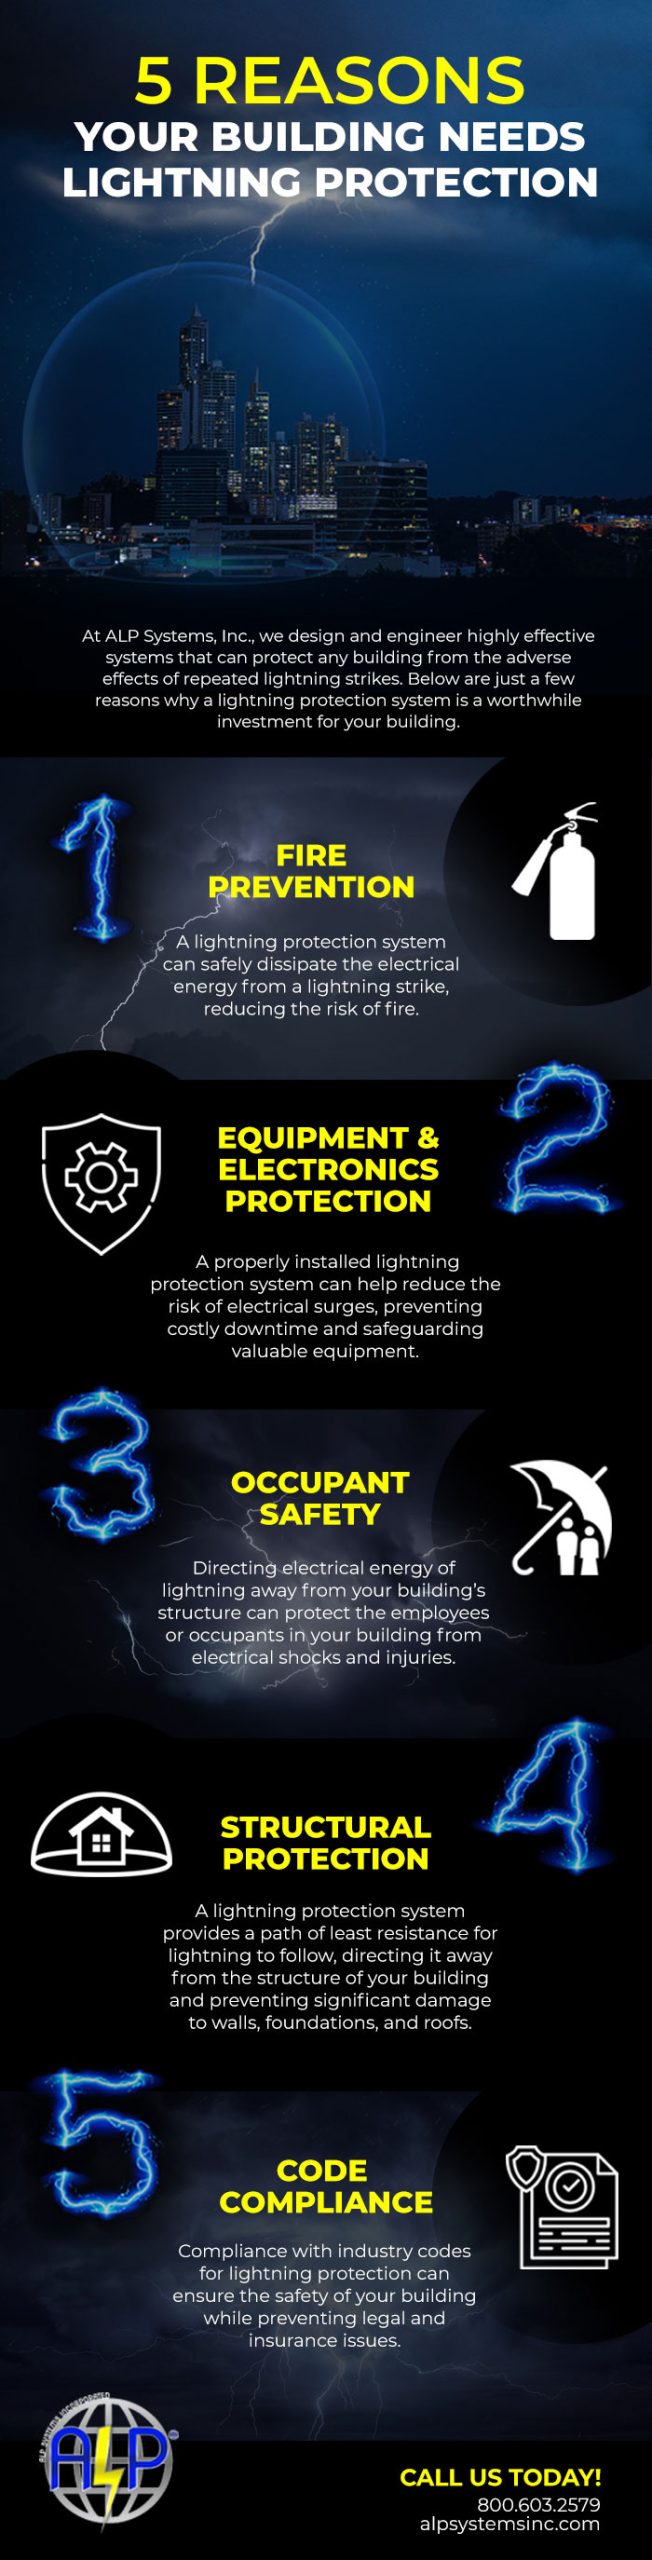 5 Reasons Your Building Needs Lightning Protection 